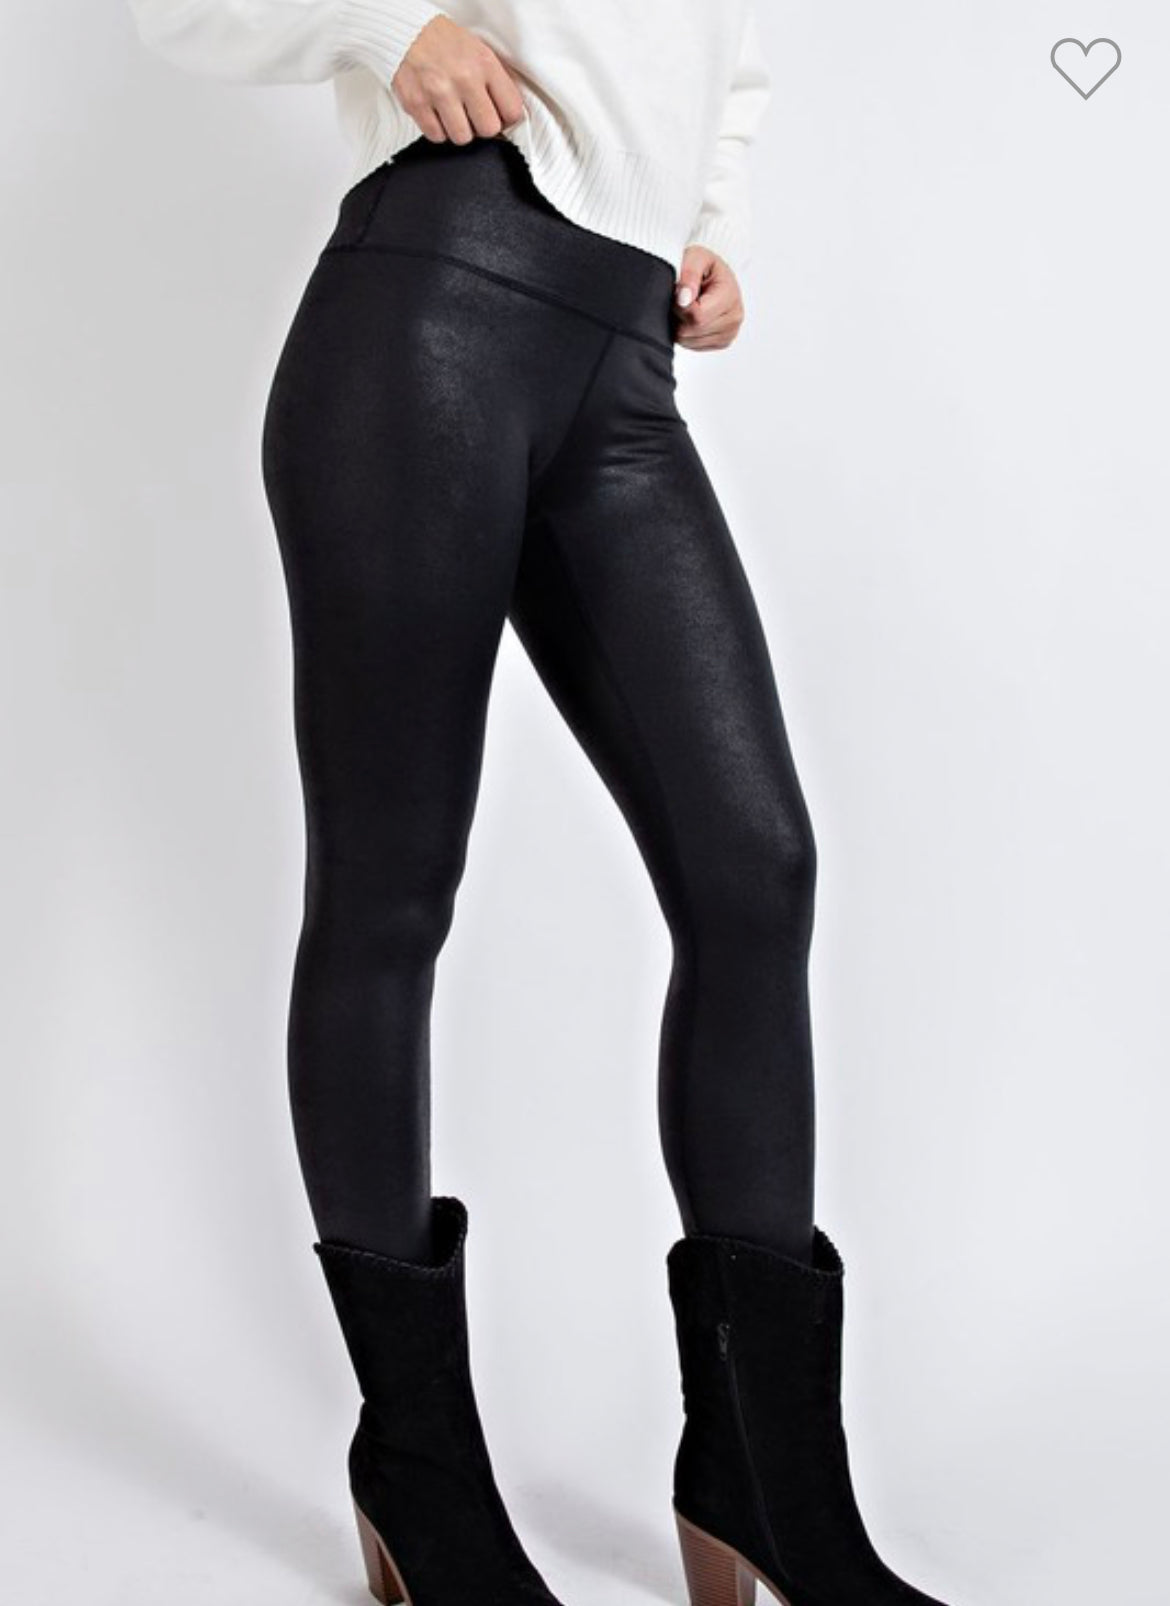 High Waisted Faux Leather Leggings Available In Store. Sizes S-M